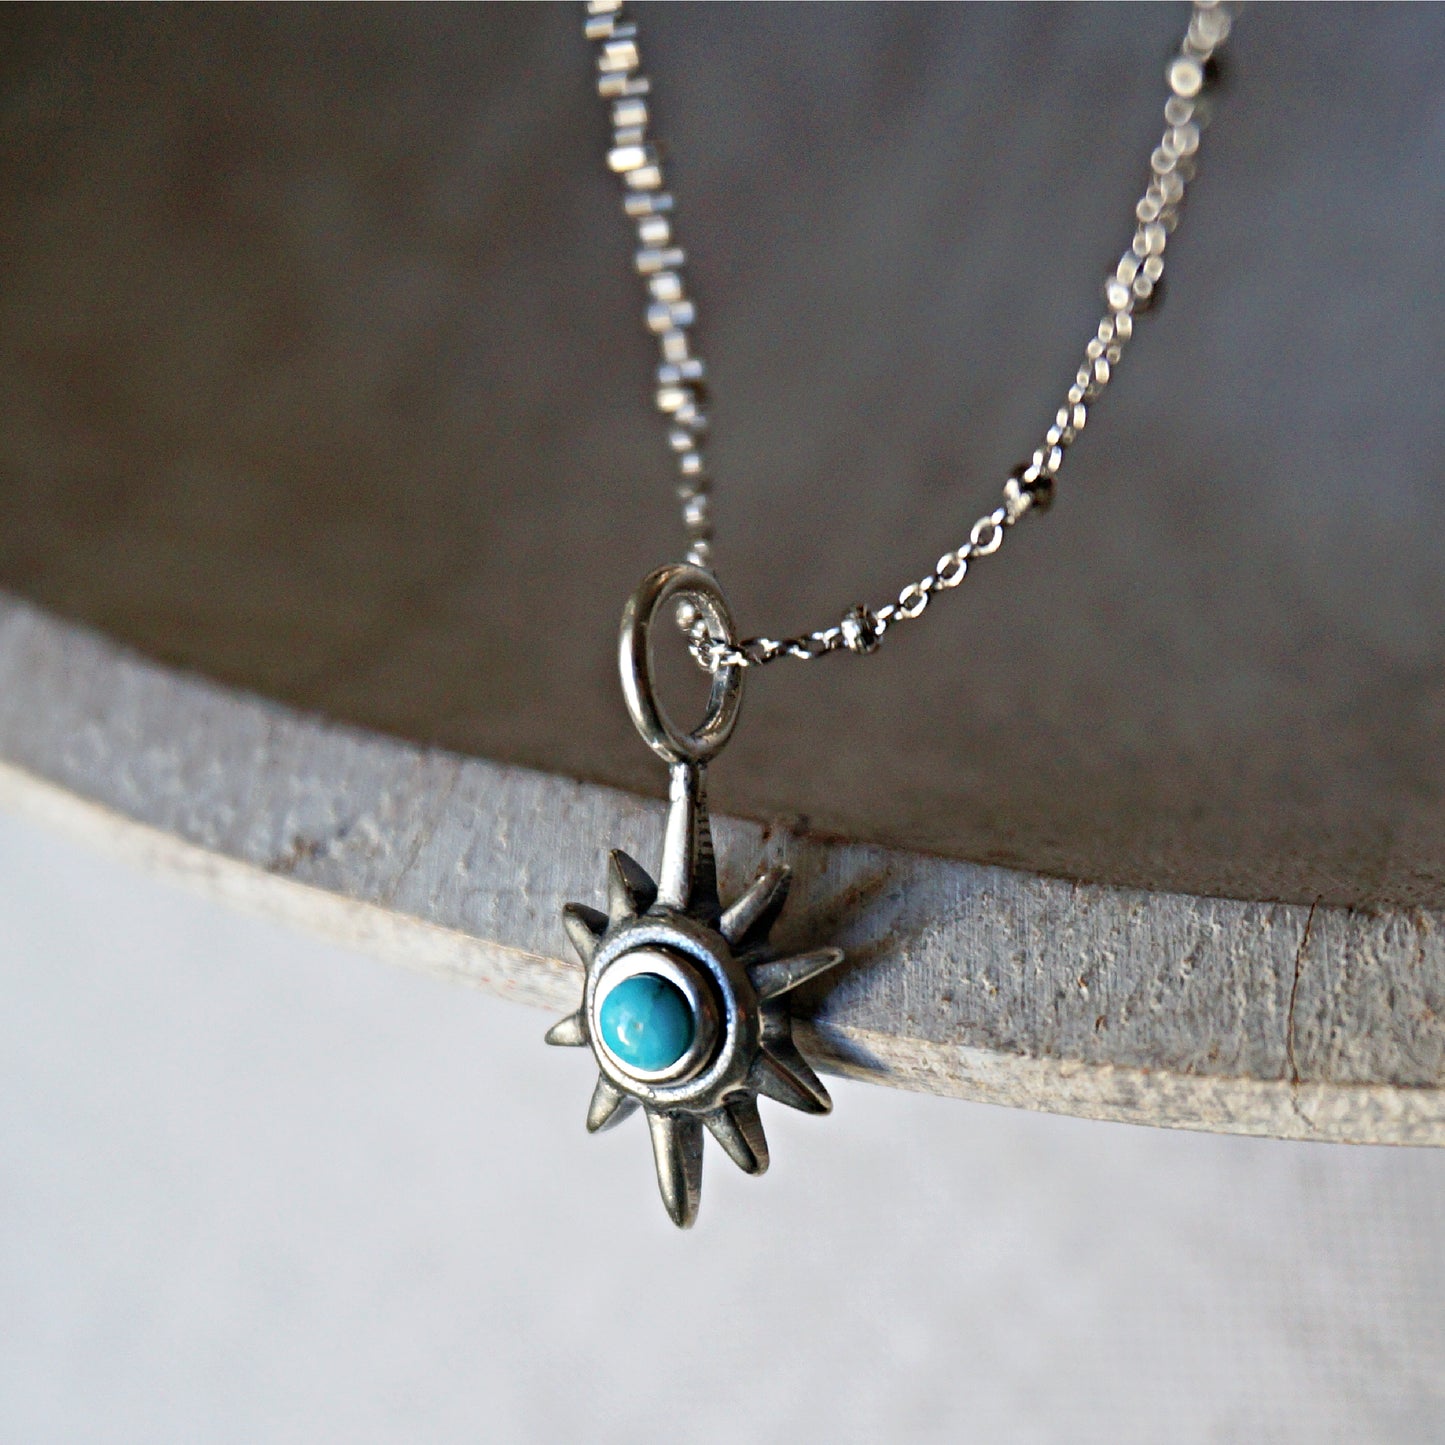 Star Turquoise Necklace - SOWELL JEWELRY